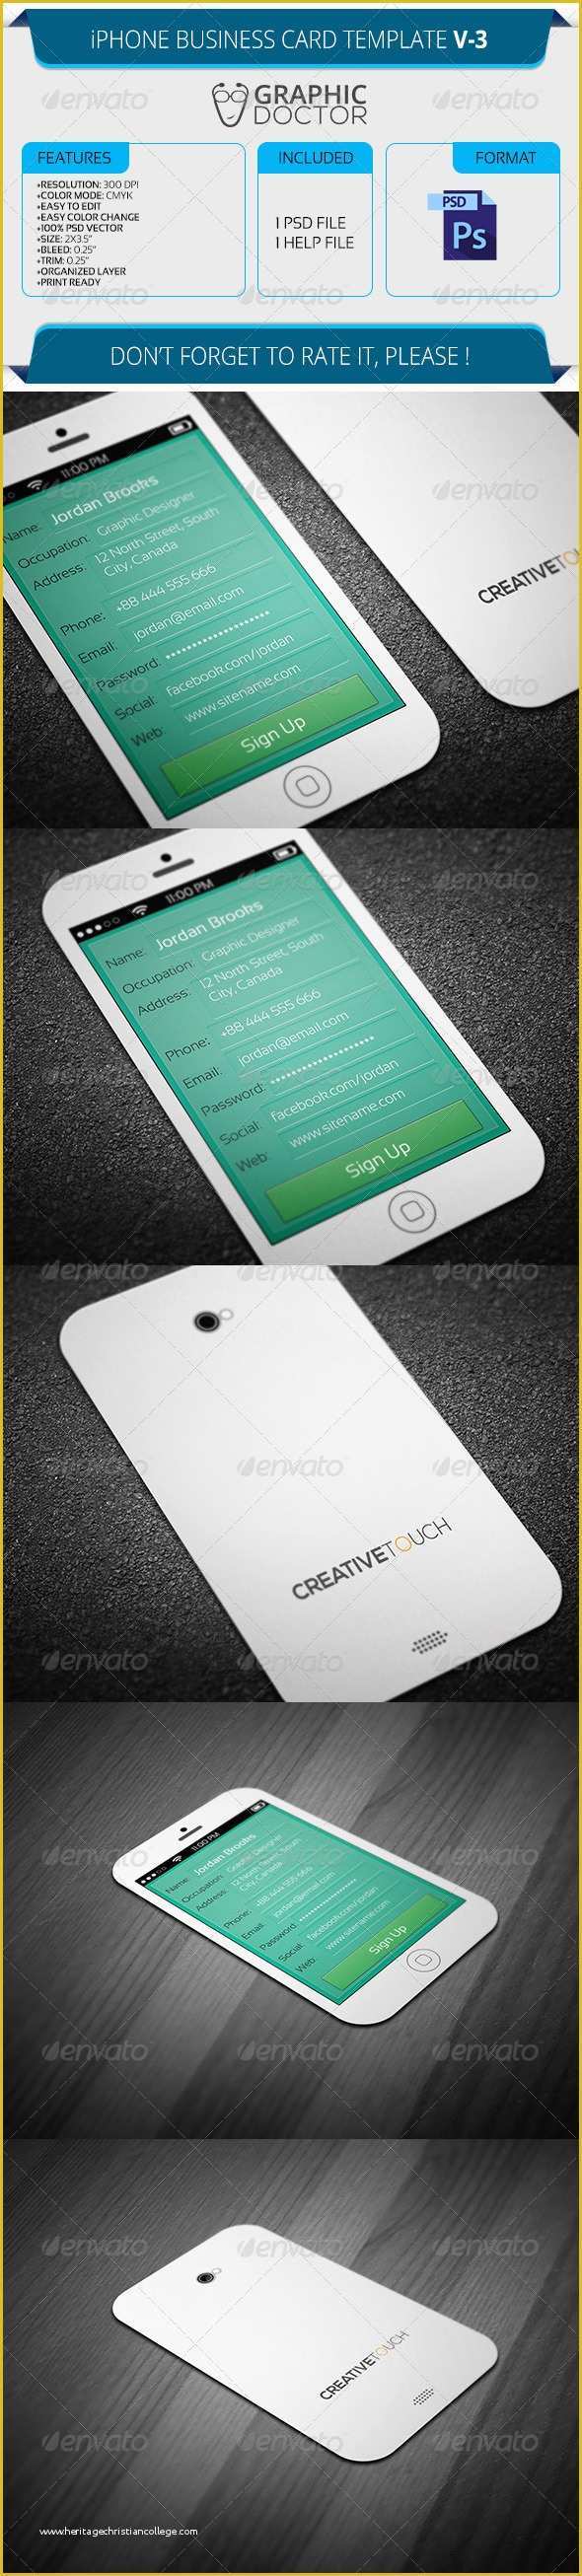 iPhone Business Card Template Free Of iPhone Business Card Template V 3 by Graphicdoctor